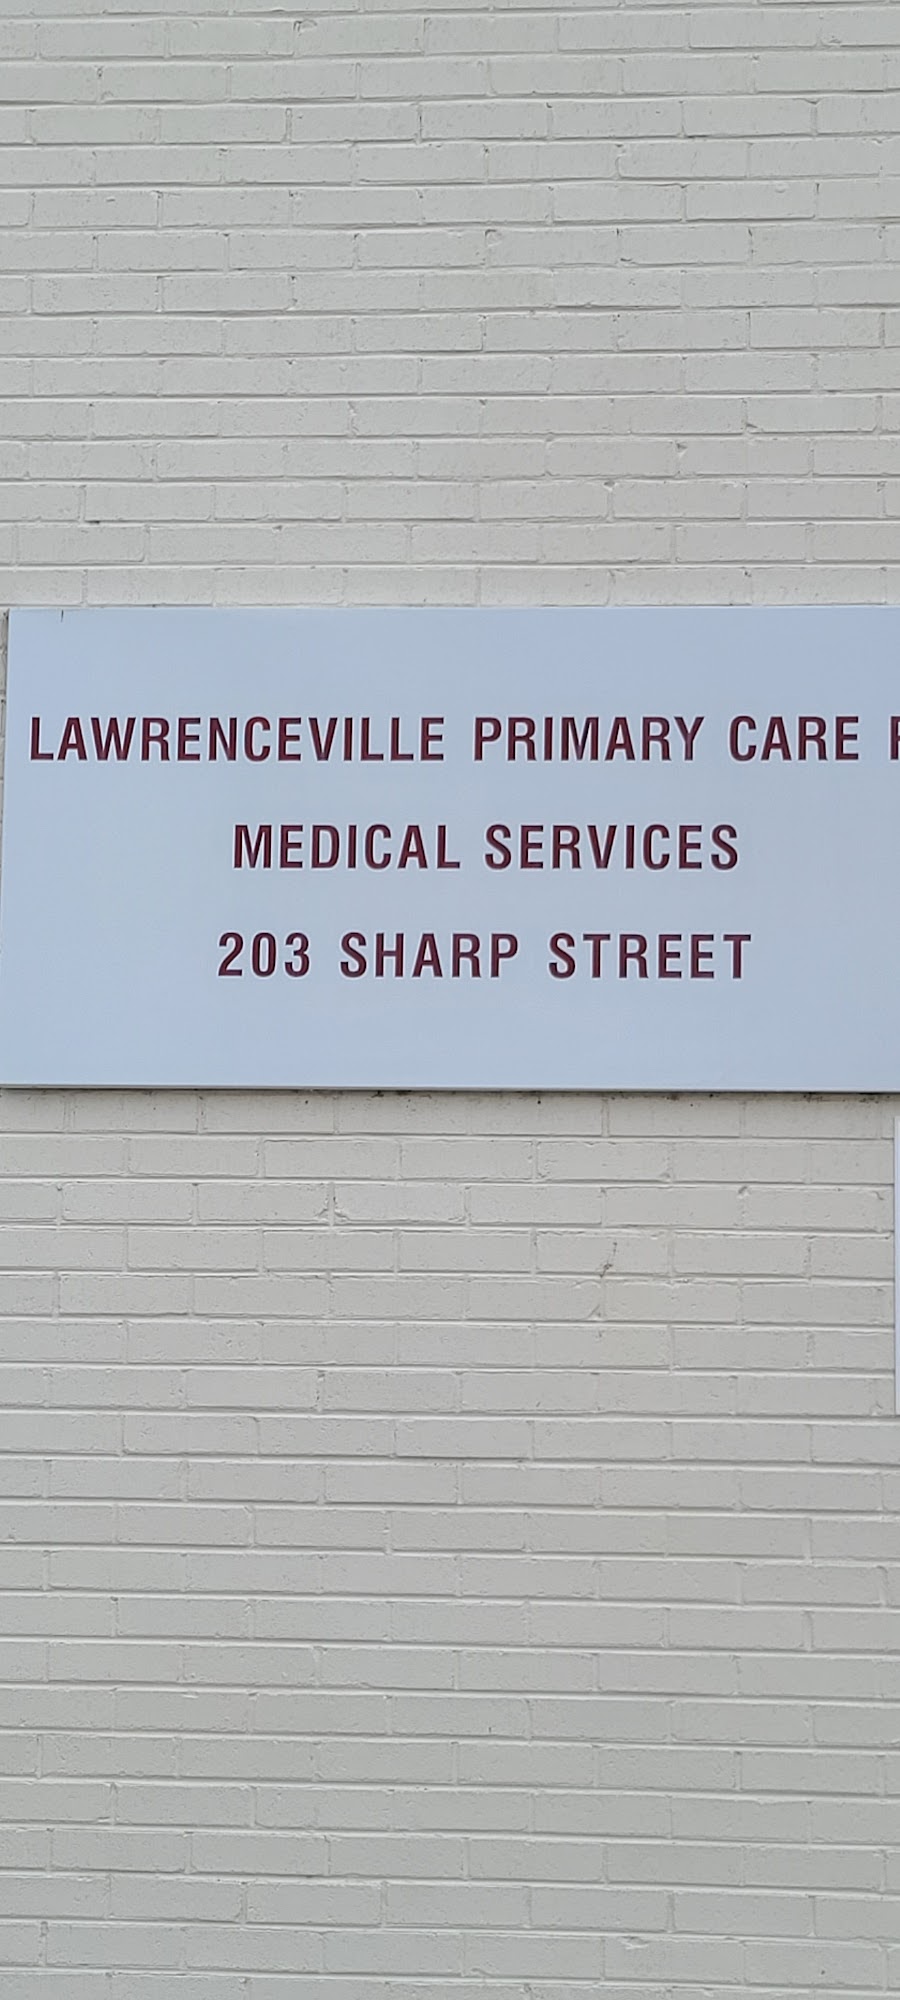 Lawrenceville Primary Care 203 Sharp St, Lawrenceville Virginia 23868